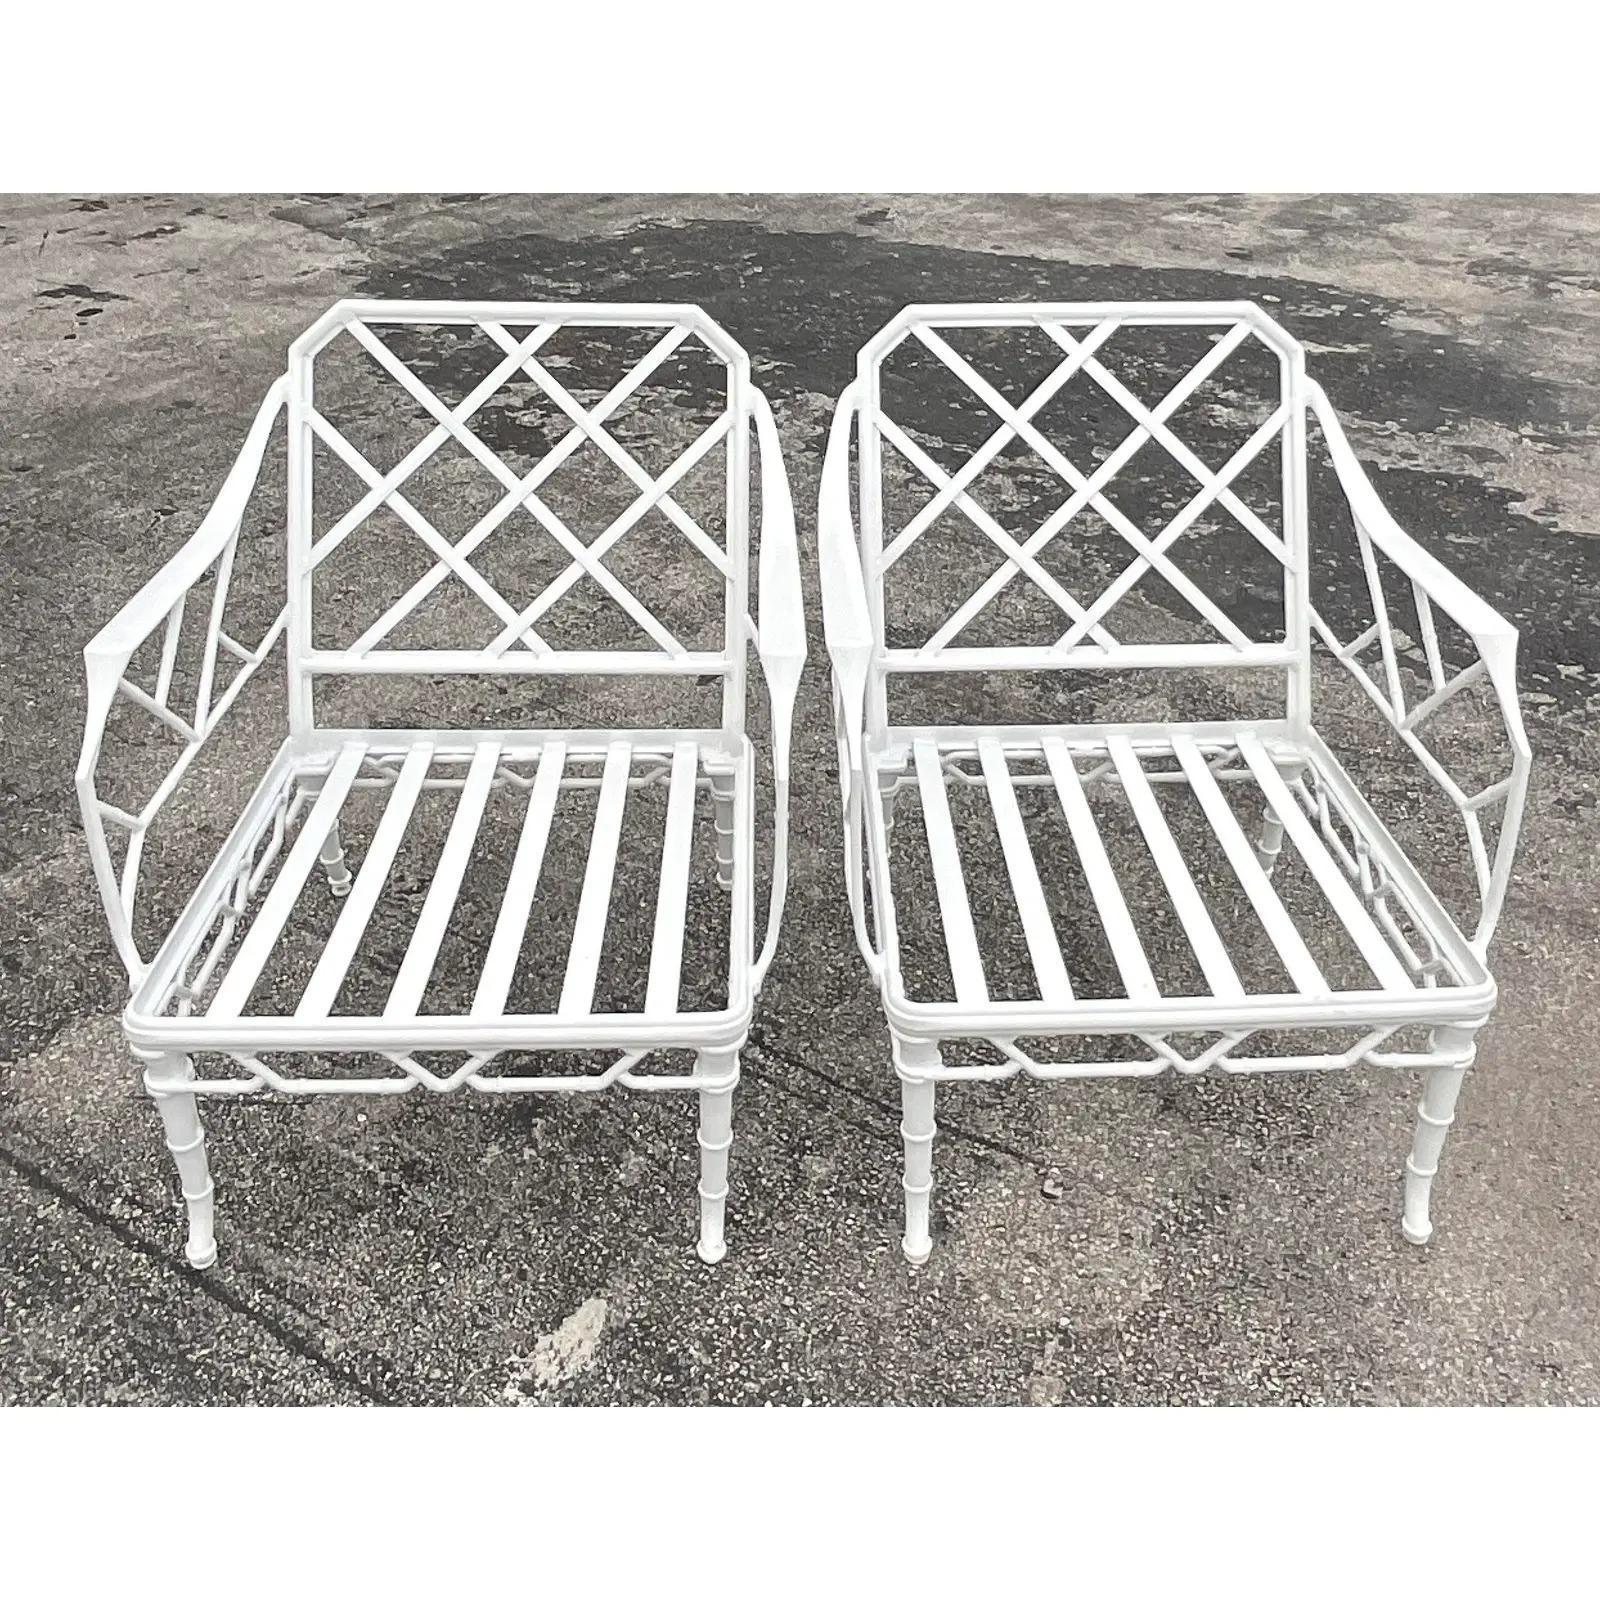 A fantastic pair of vintage Coastal outdoor lounge chairs. Made by the iconic Brown Jordan group in a cast aluminum. Ordered by the designer and never installed. Signed on the back. Acquired from a Palm Beach estate.